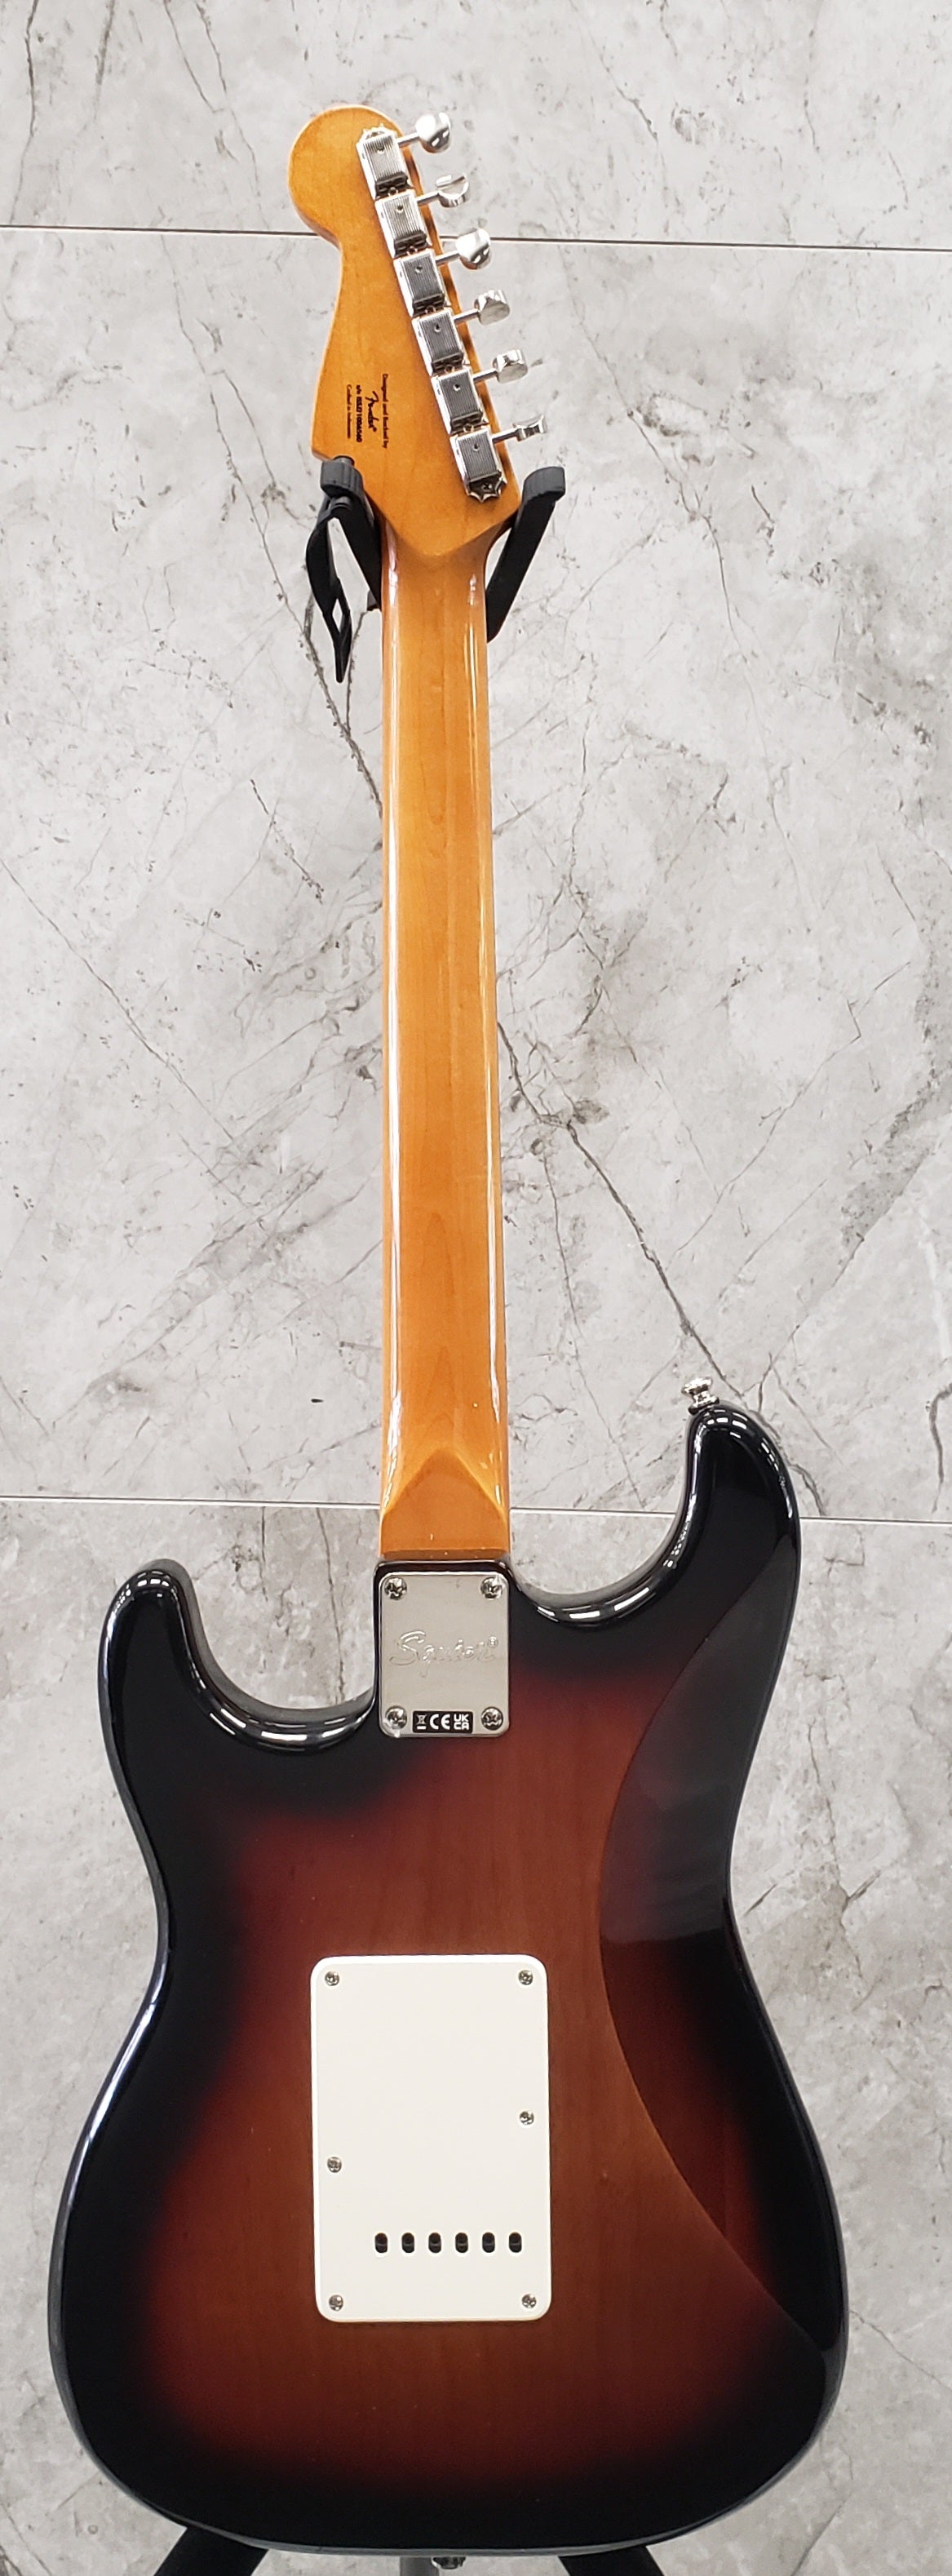 Squier Classic Vibe 60s Stratocaster 3-Color Sunburst 0374010500 - SERIAL NUMBER ISSJ21006560 - 7.6 LBS